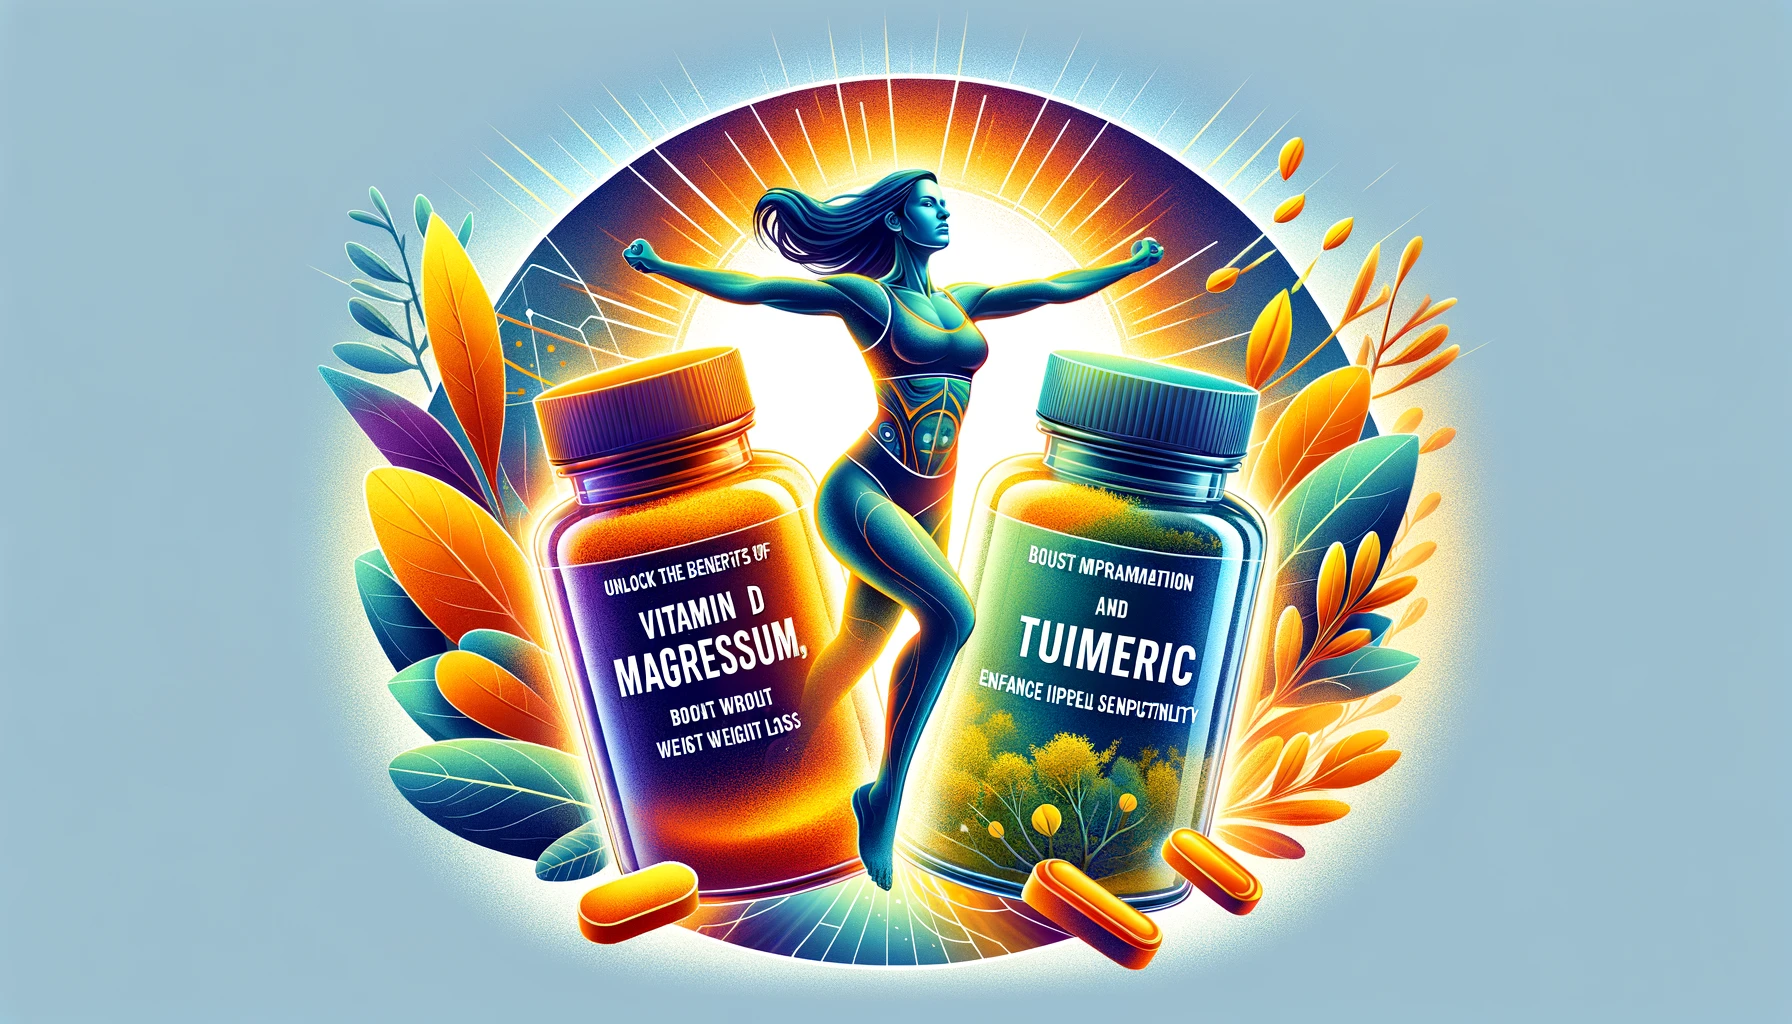 Vitamin D magnesium and turmeric for weight loss 03